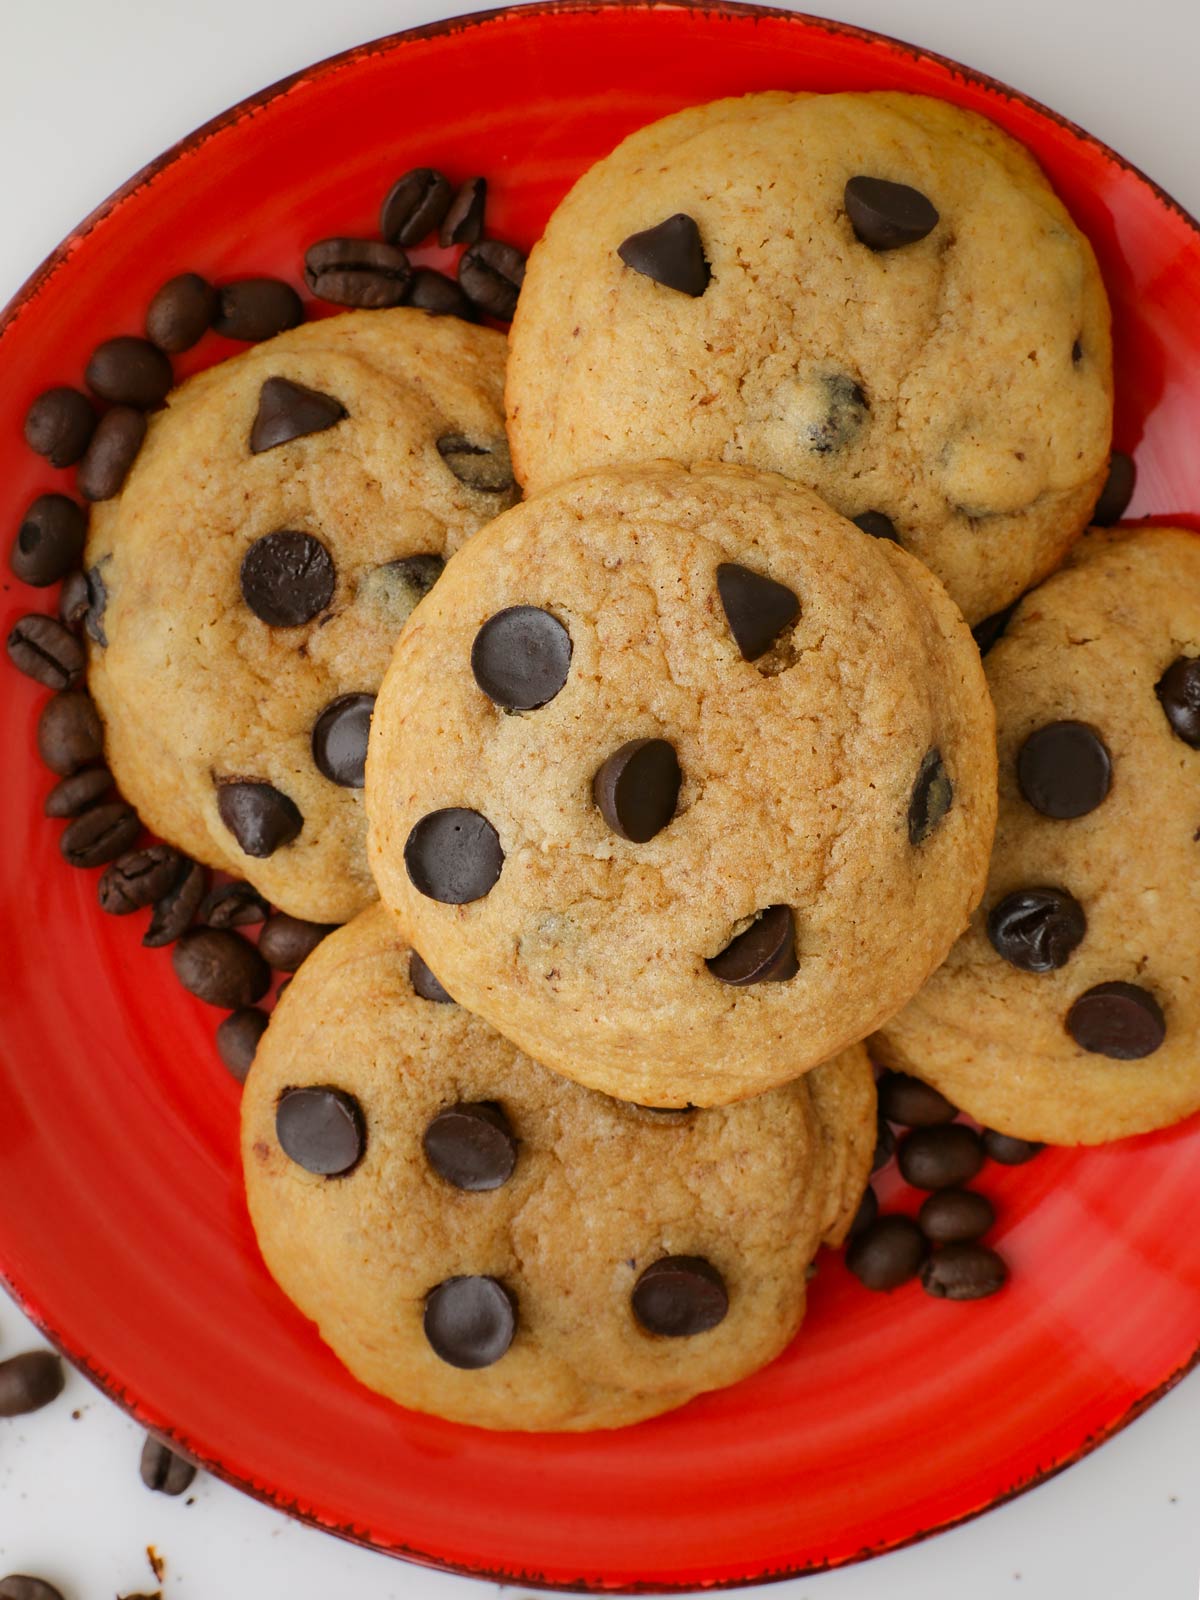 coffee cookies piled on red plate with coffee beans.